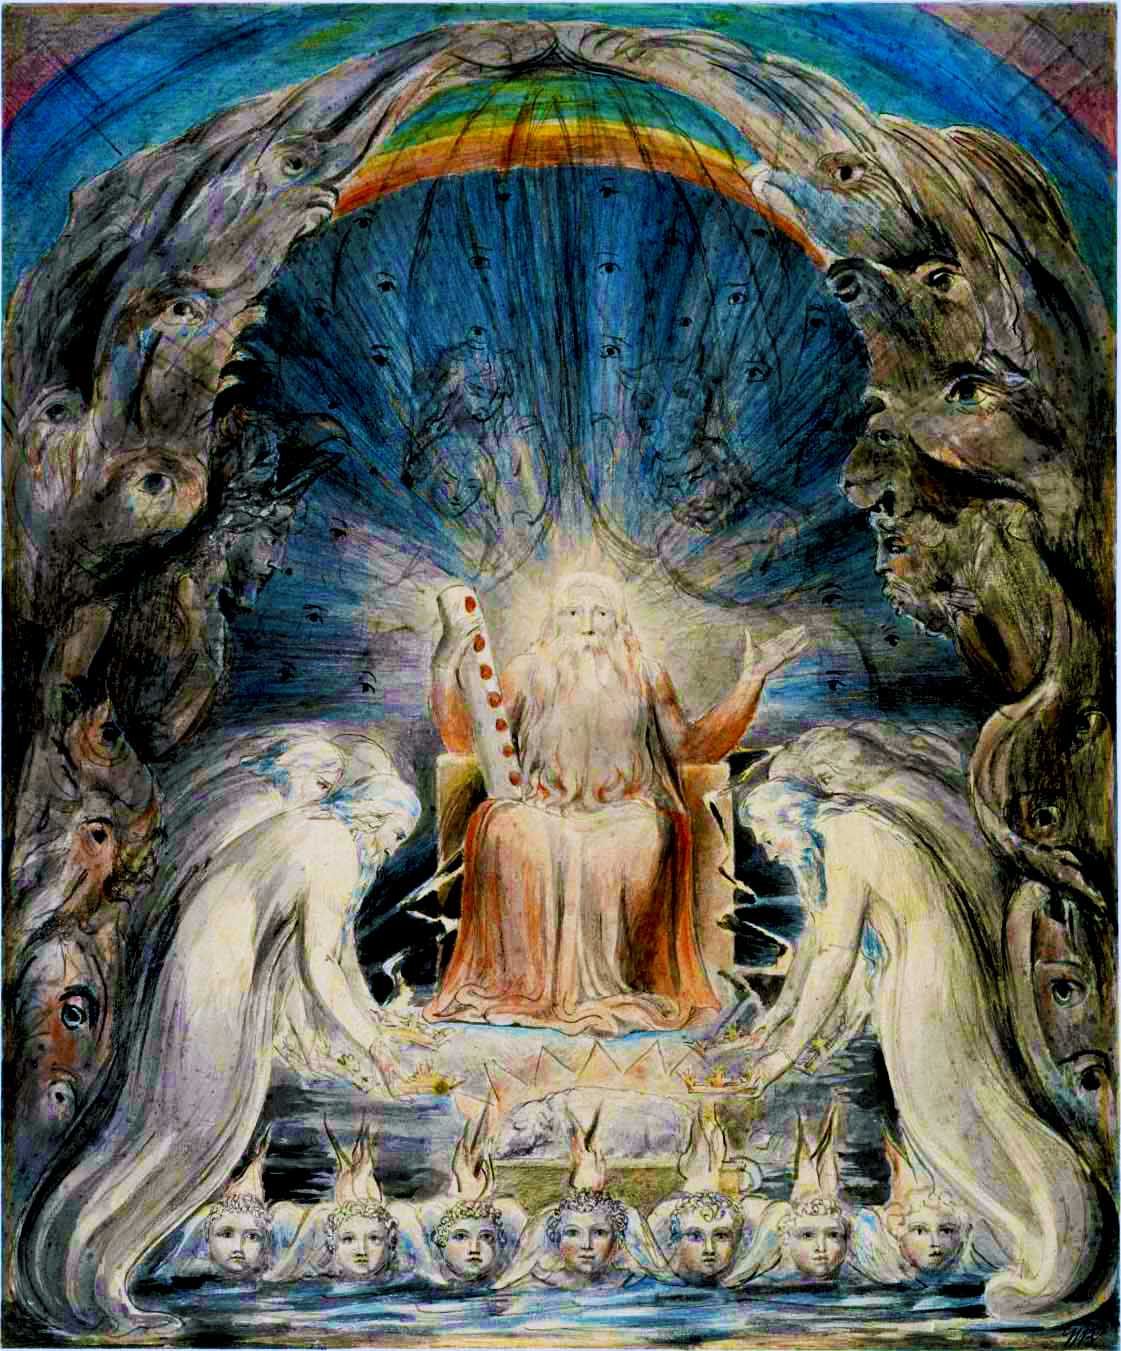 The Four and Twenty Elders Casting their Crowns before the Divine Throne c.1803-5 William Blake 1757-1827 Presented by the executors of W. Graham Robertson through the Art Fund 1949 http://www.tate.org.uk/art/work/N05897